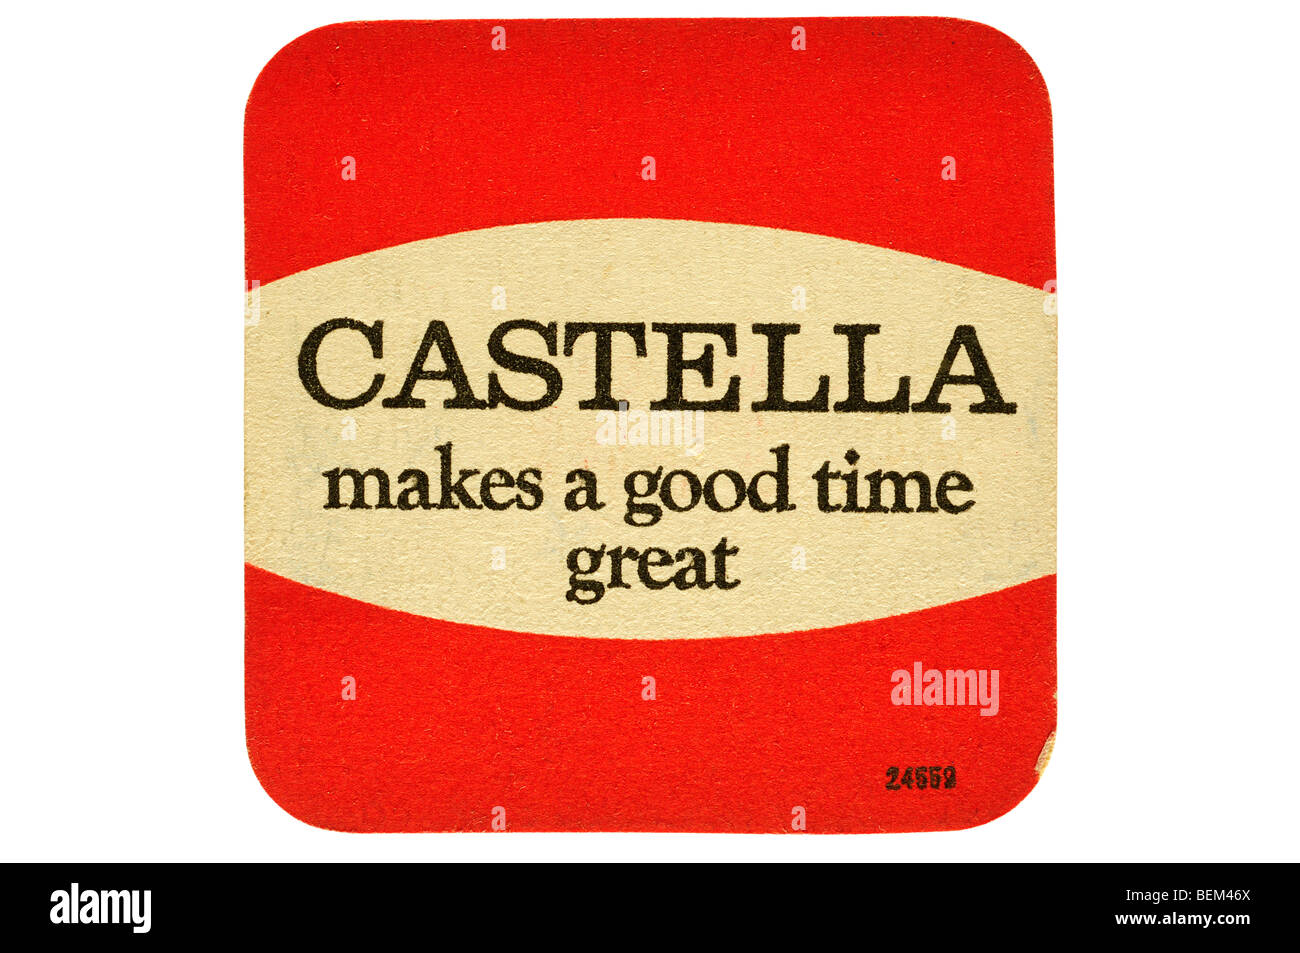 castella makes a good time great Stock Photo